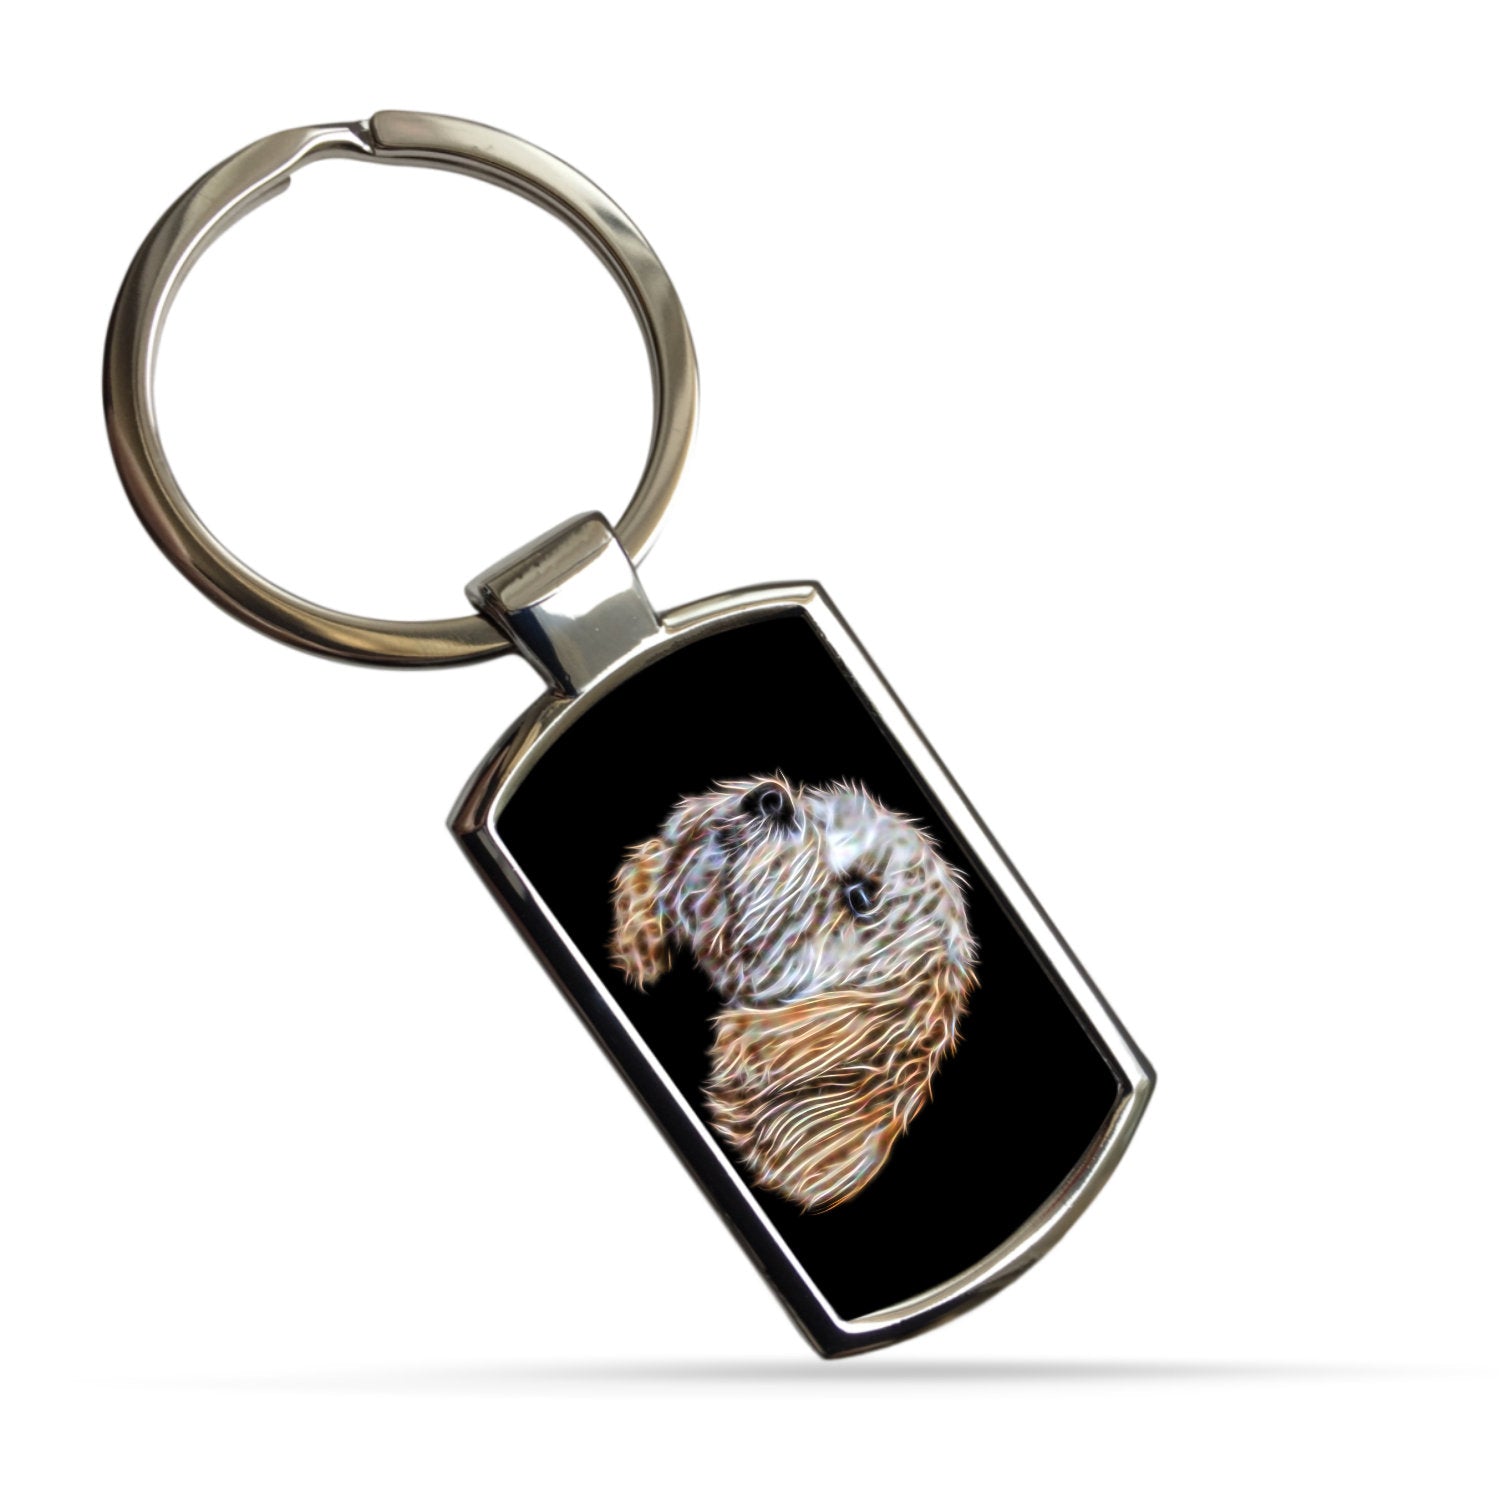 Cavachon Keychain with Stunning Fractal Art Design. A Perfect Gift for Dog Lover.